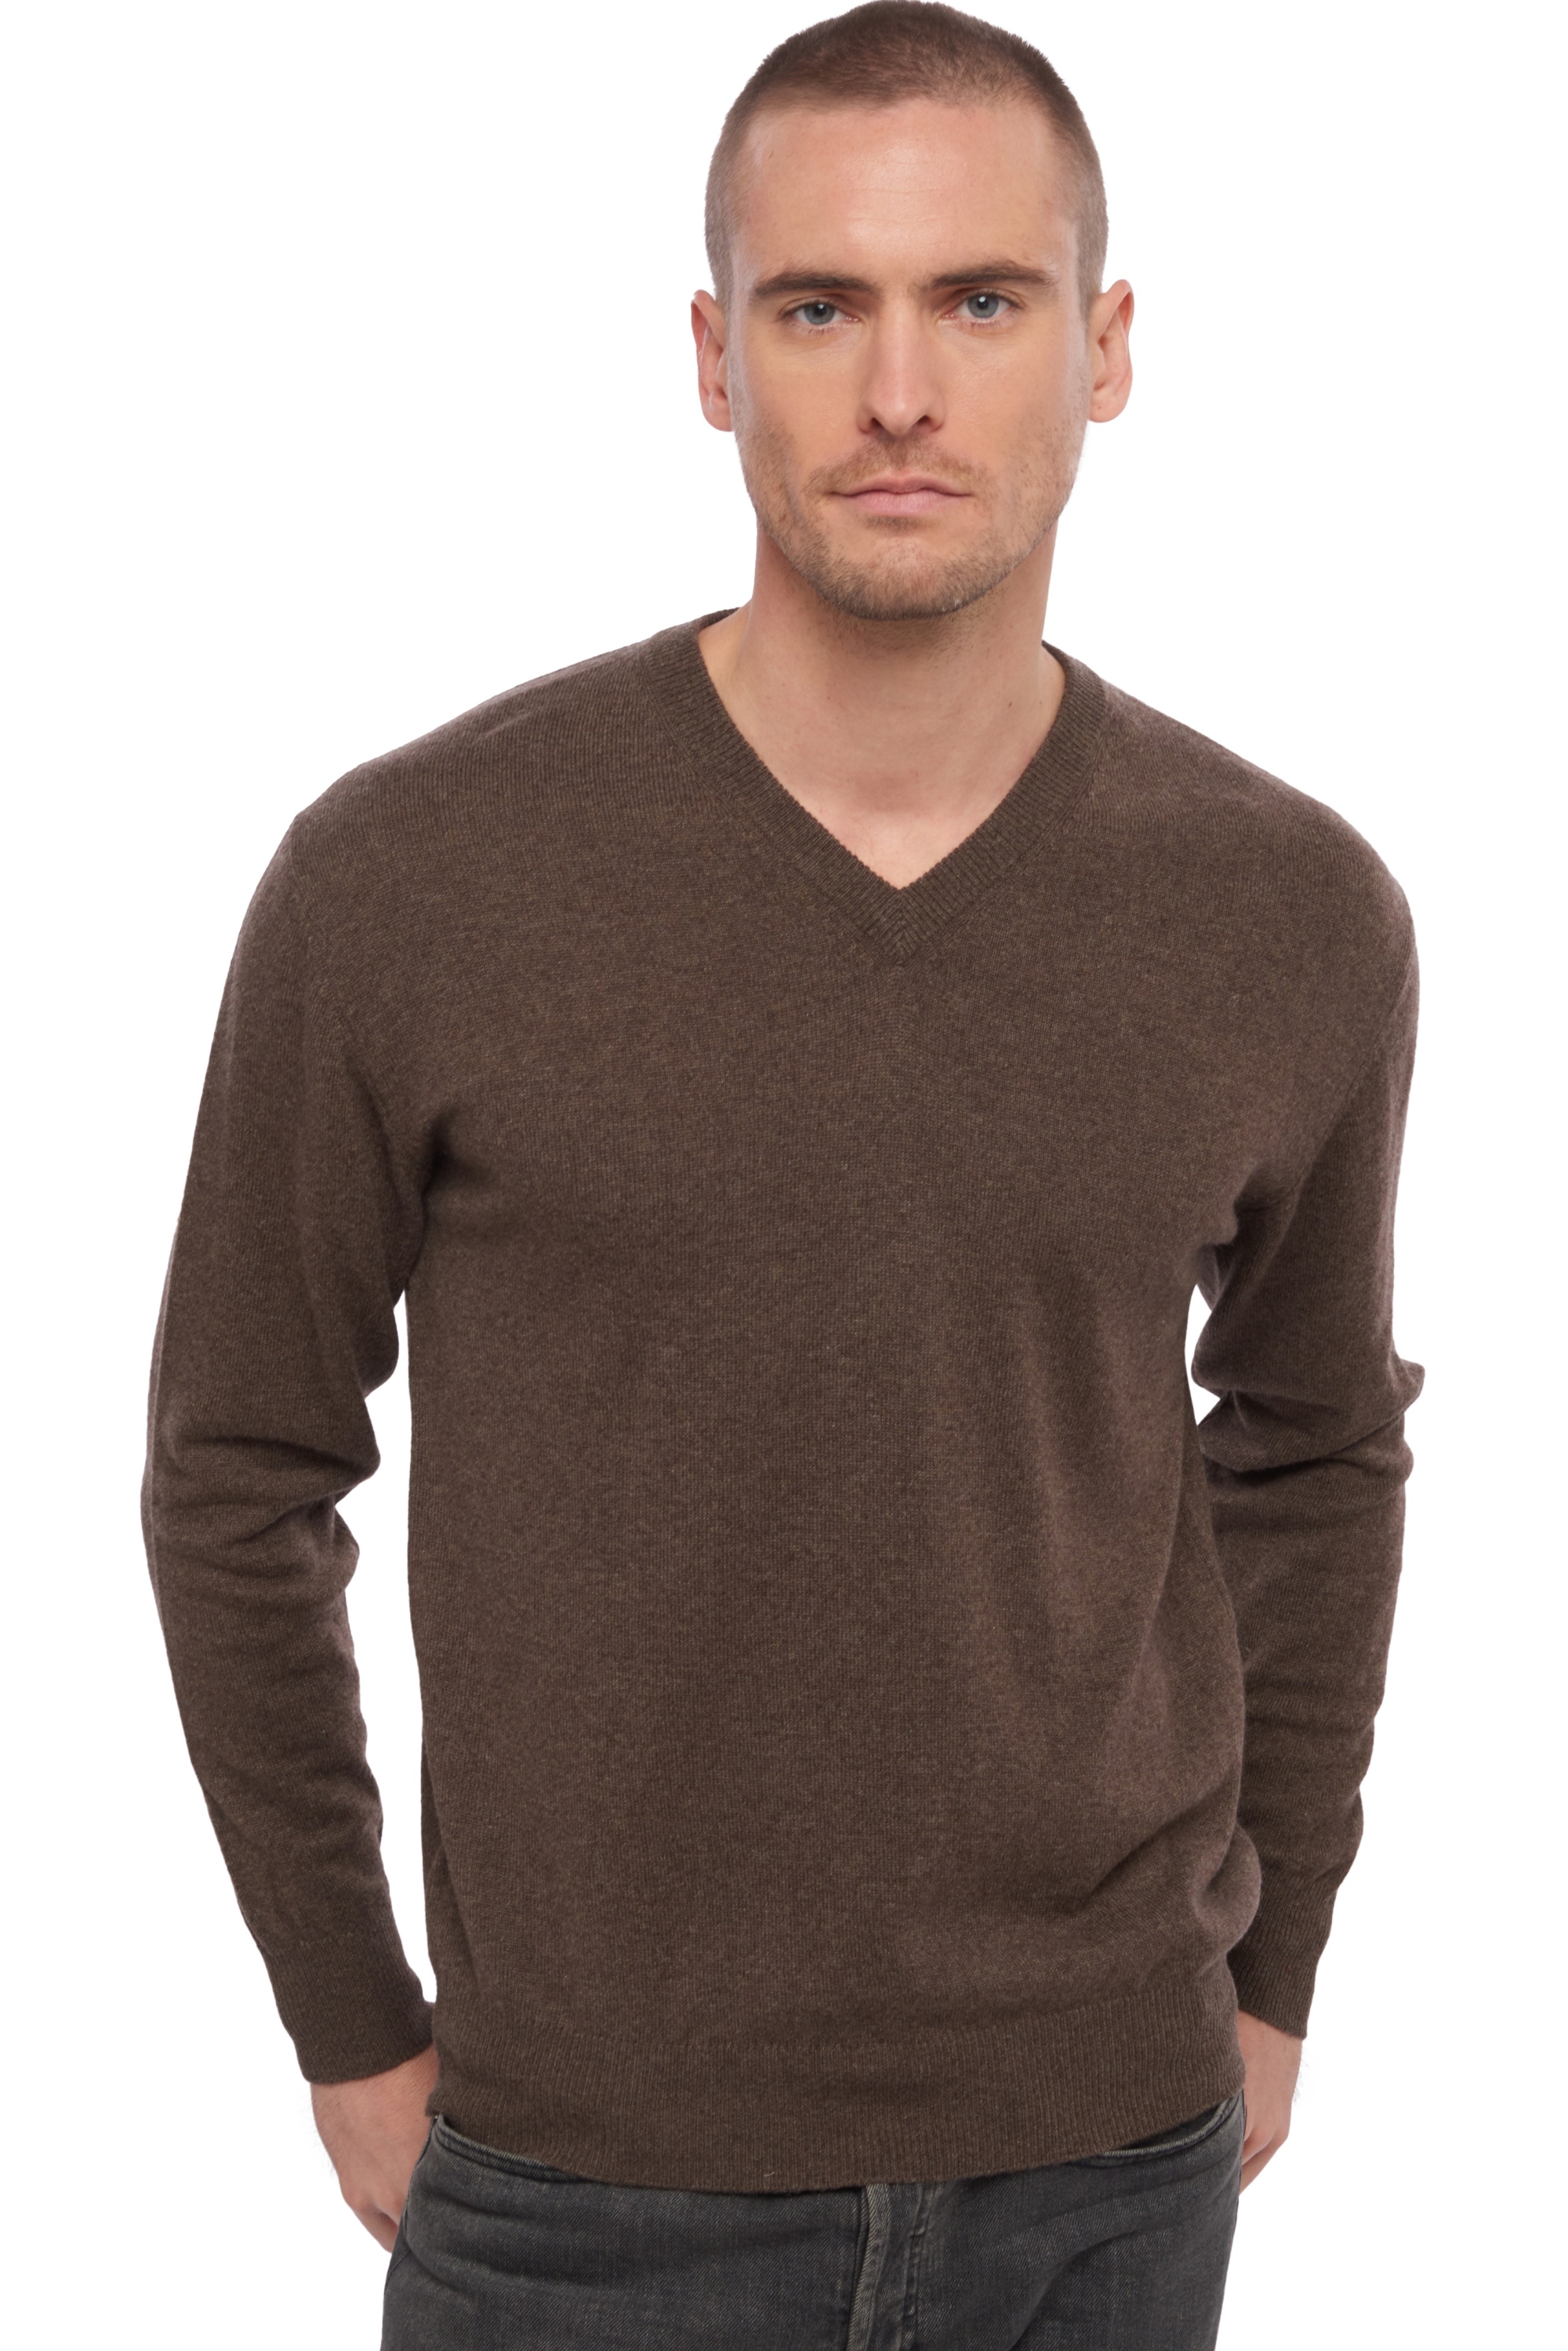 Cachemire pull homme hippolyte marron chine 2xl